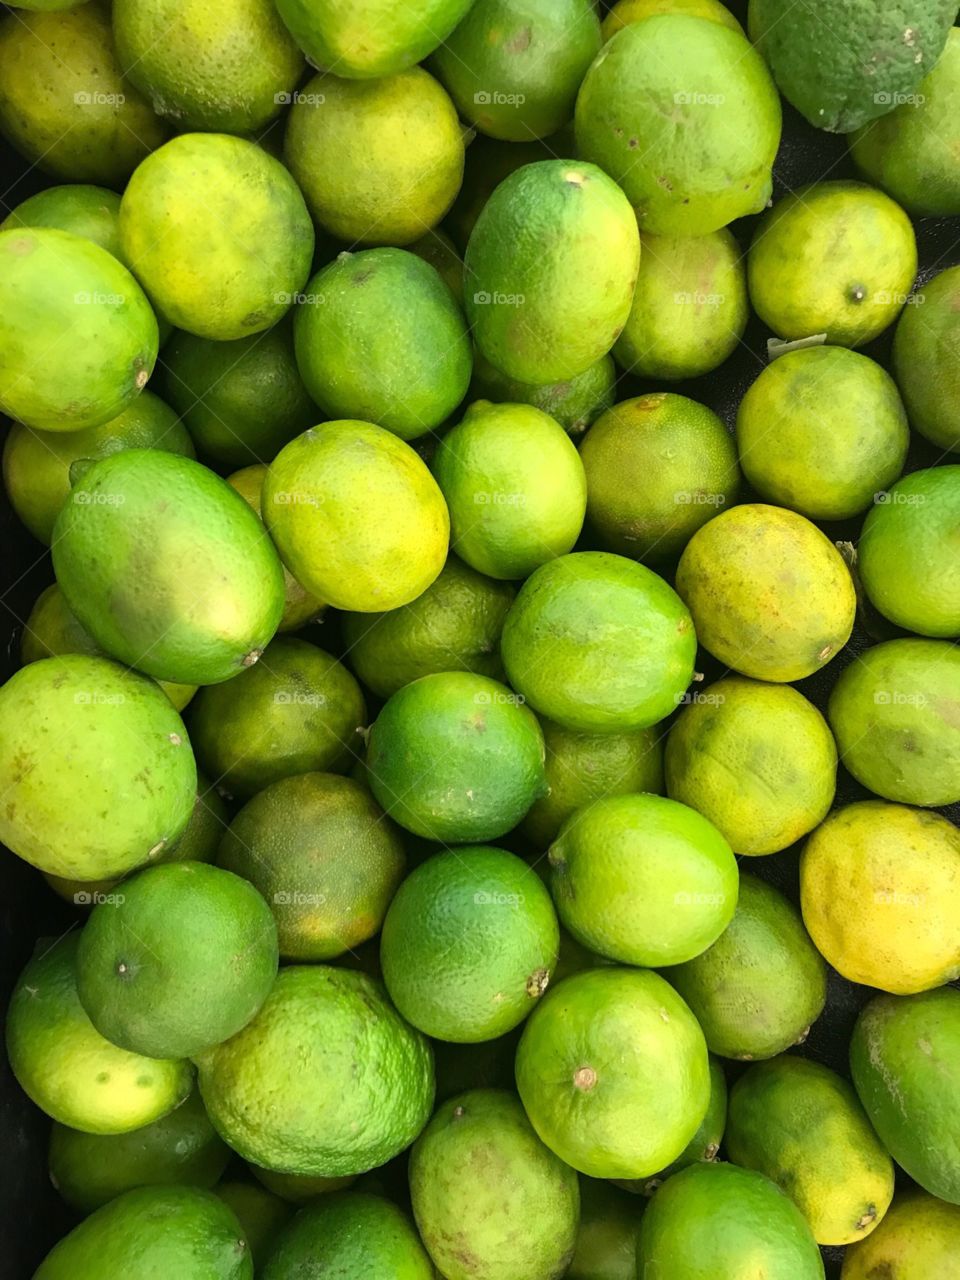 A bunch of green ripe Limes picked from the lime tree on a nice summers day. USA, America 